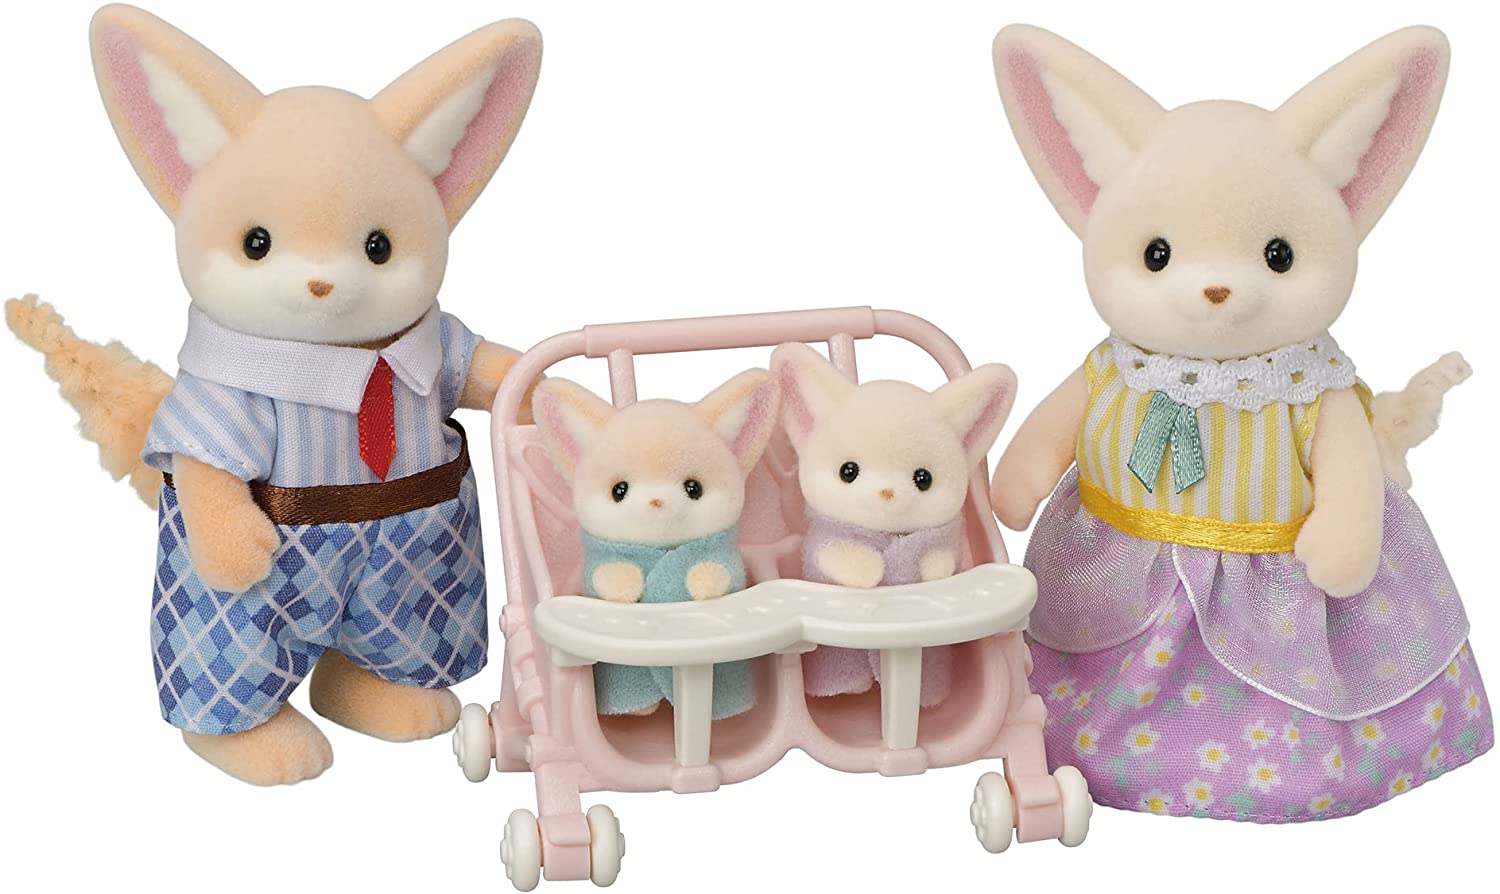 Sylvanian Families DUCK FAMILY Calico Critters C-64 Epoch Doll Figurine  Japan